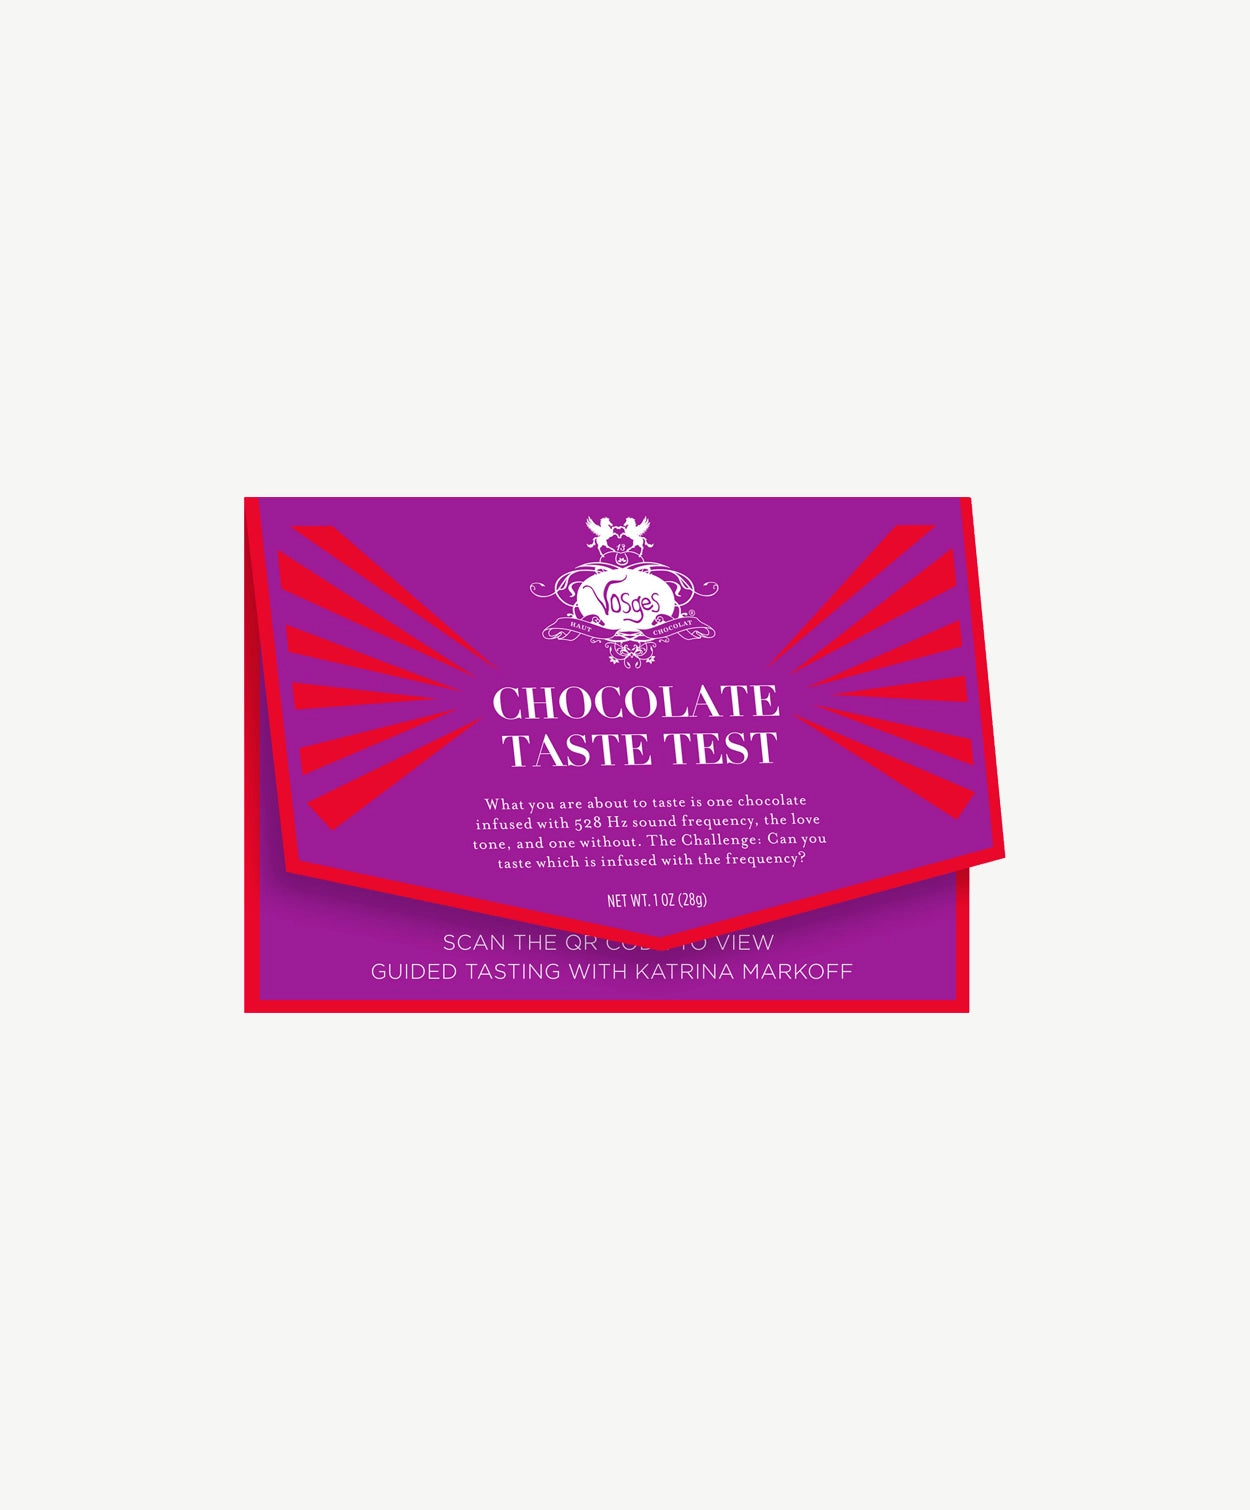 A pink and red envelope reading, "Chocolate Taste Test" sit's on a light grey background.